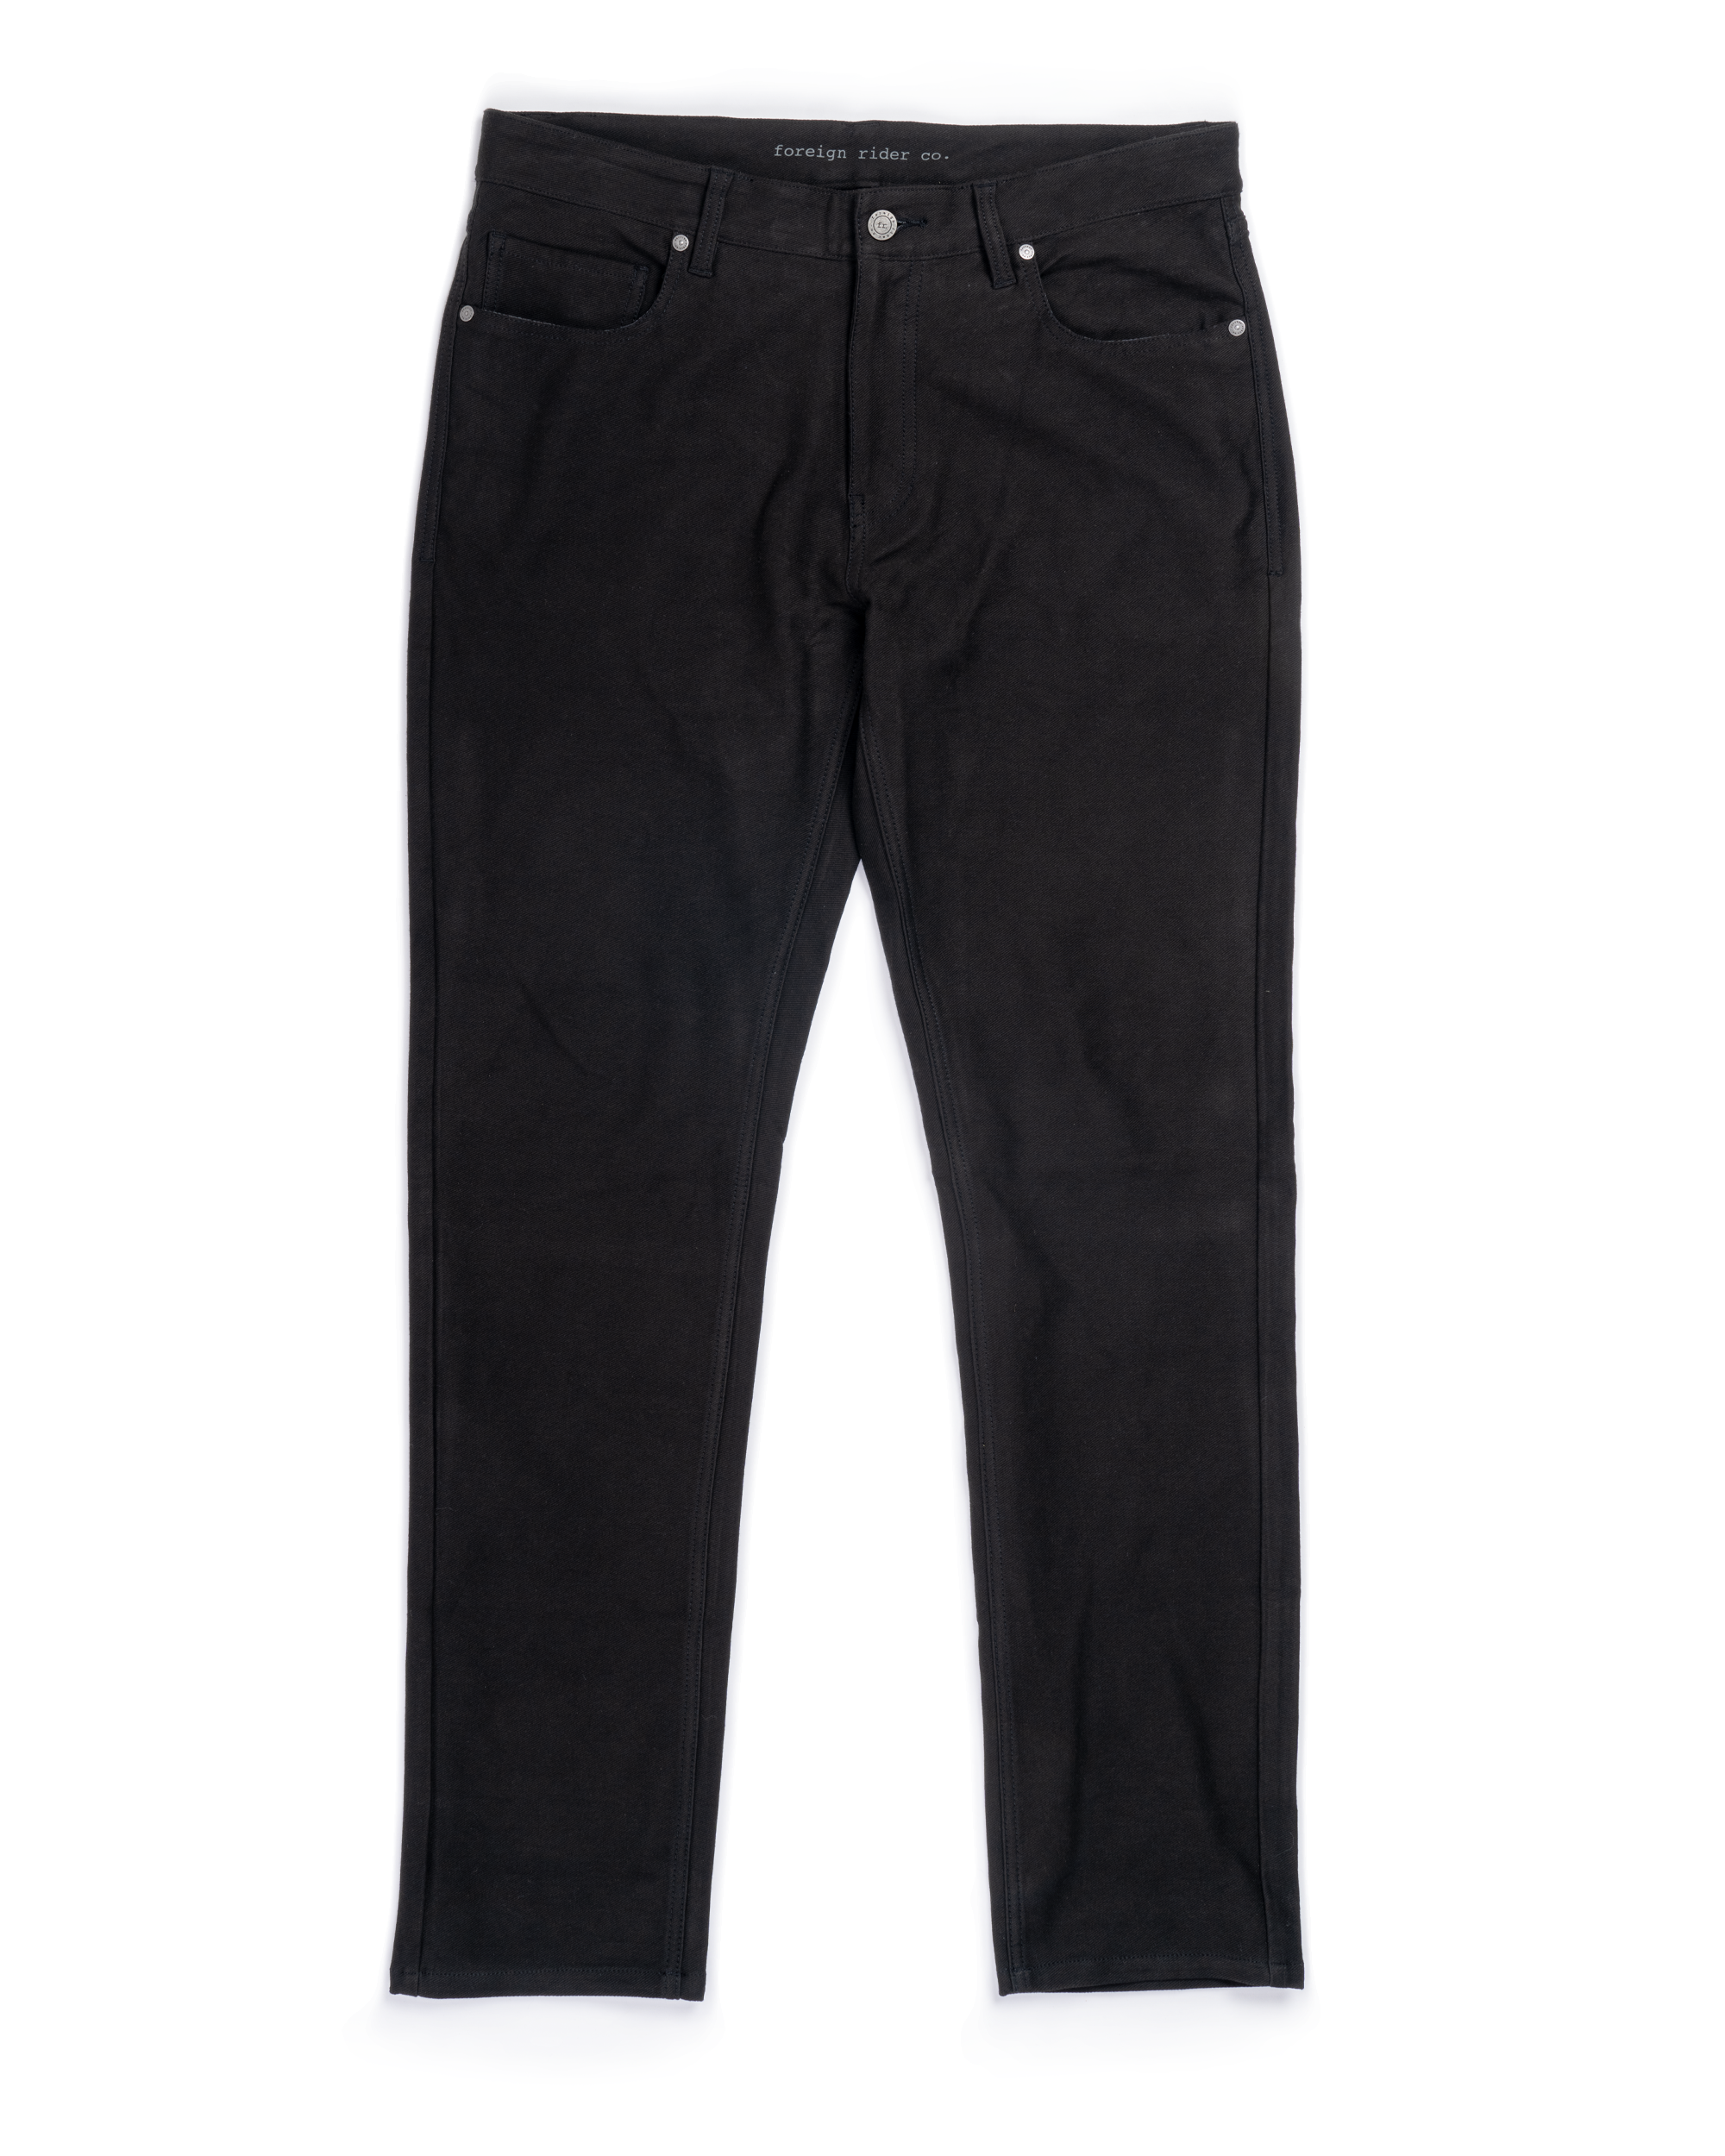 5 Pocket Organic Cotton Pant Black - Foreign Rider Co.